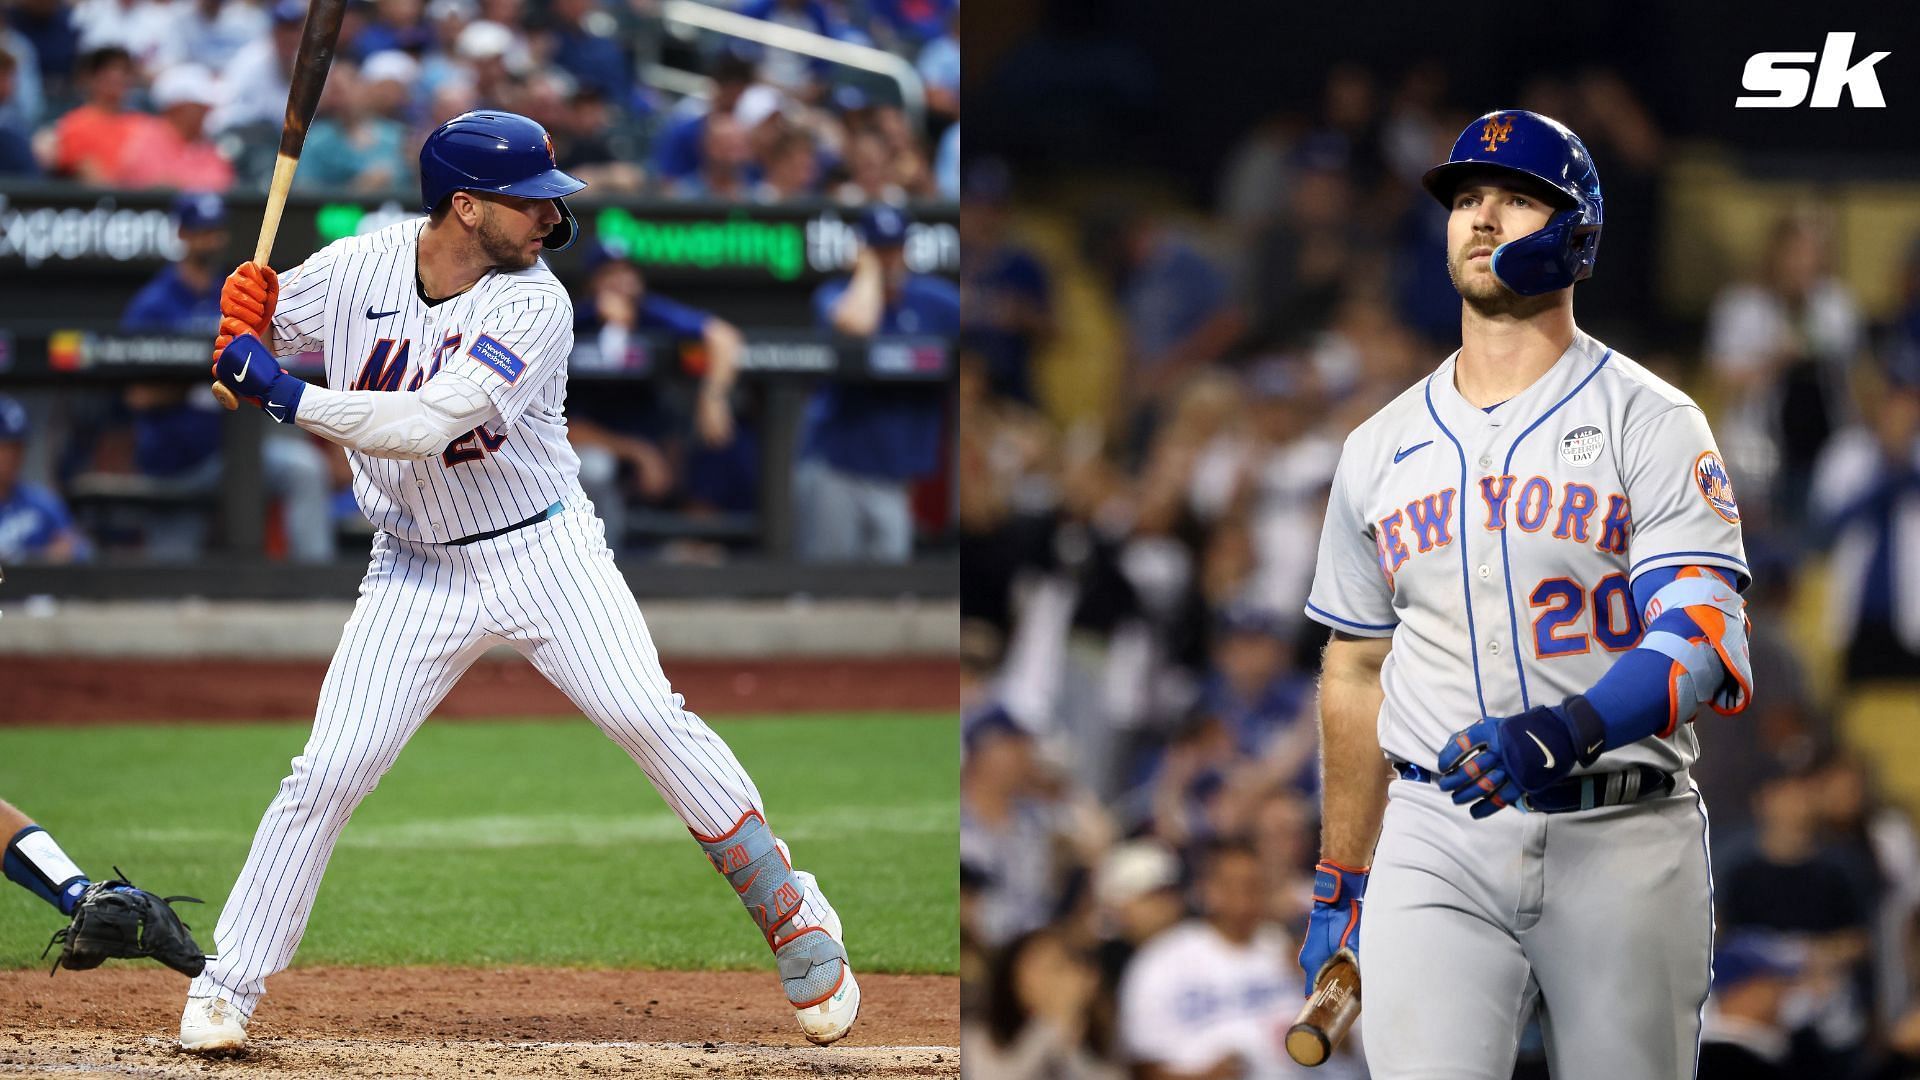 Pete Alonso hit his 40th homer of the season on Monday